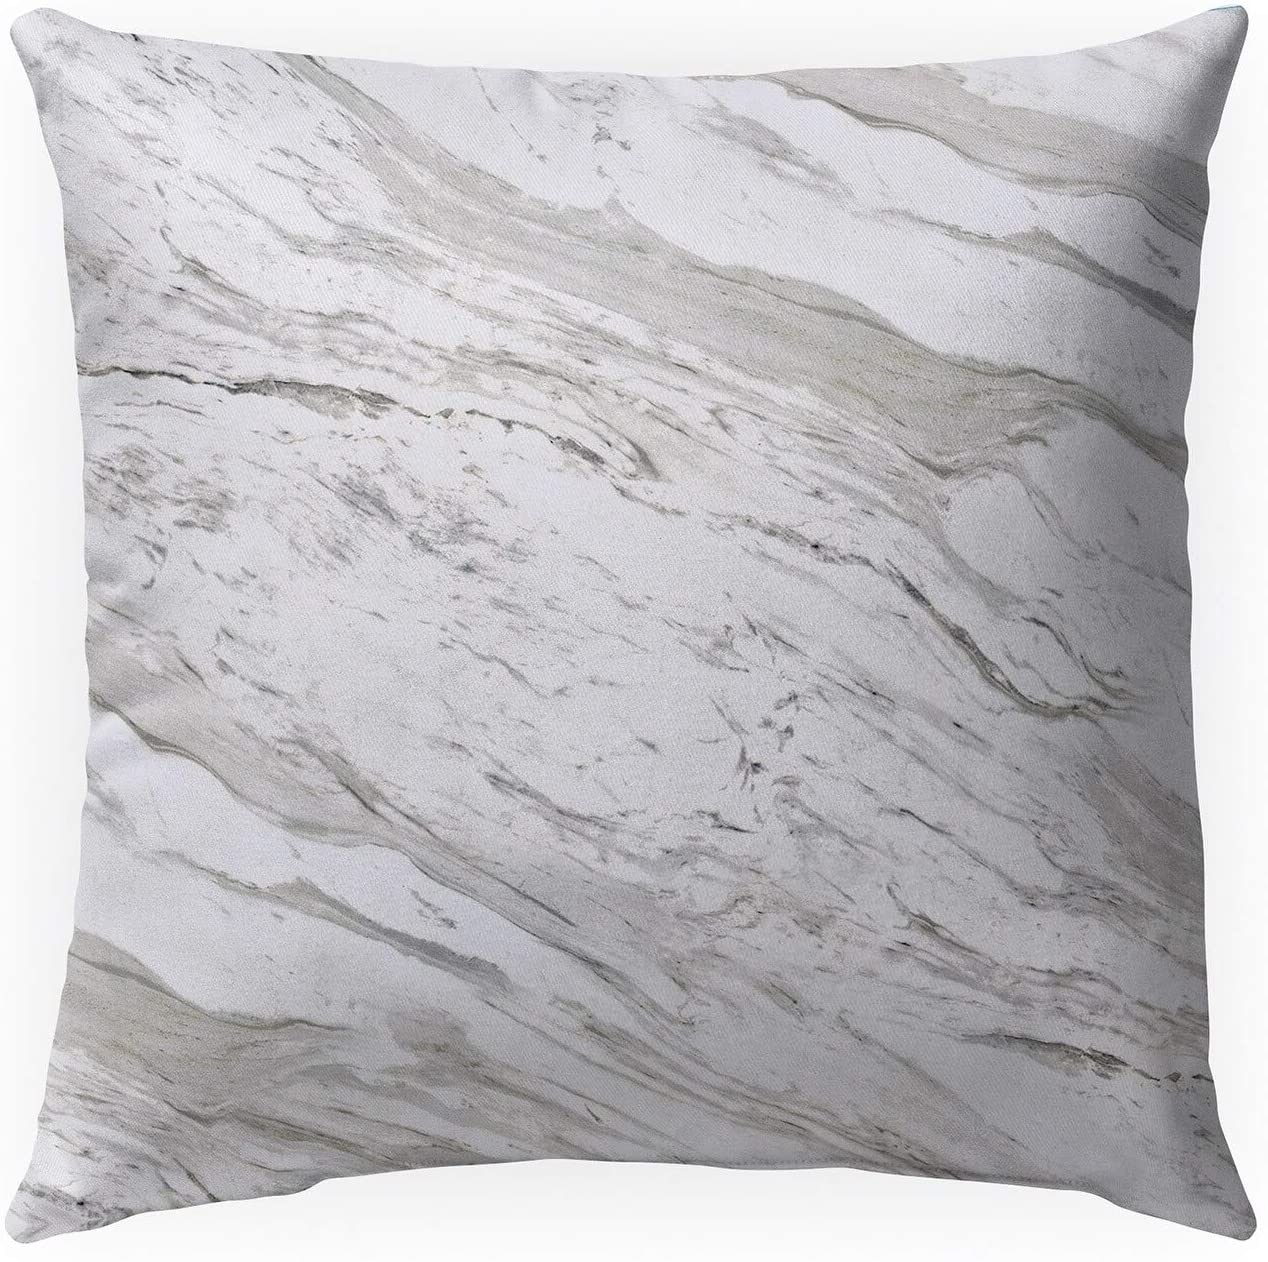 Marble Indoor|Outdoor Pillow by Marina 18x18 Grey Geometric Southwestern Polyester Removable Cover